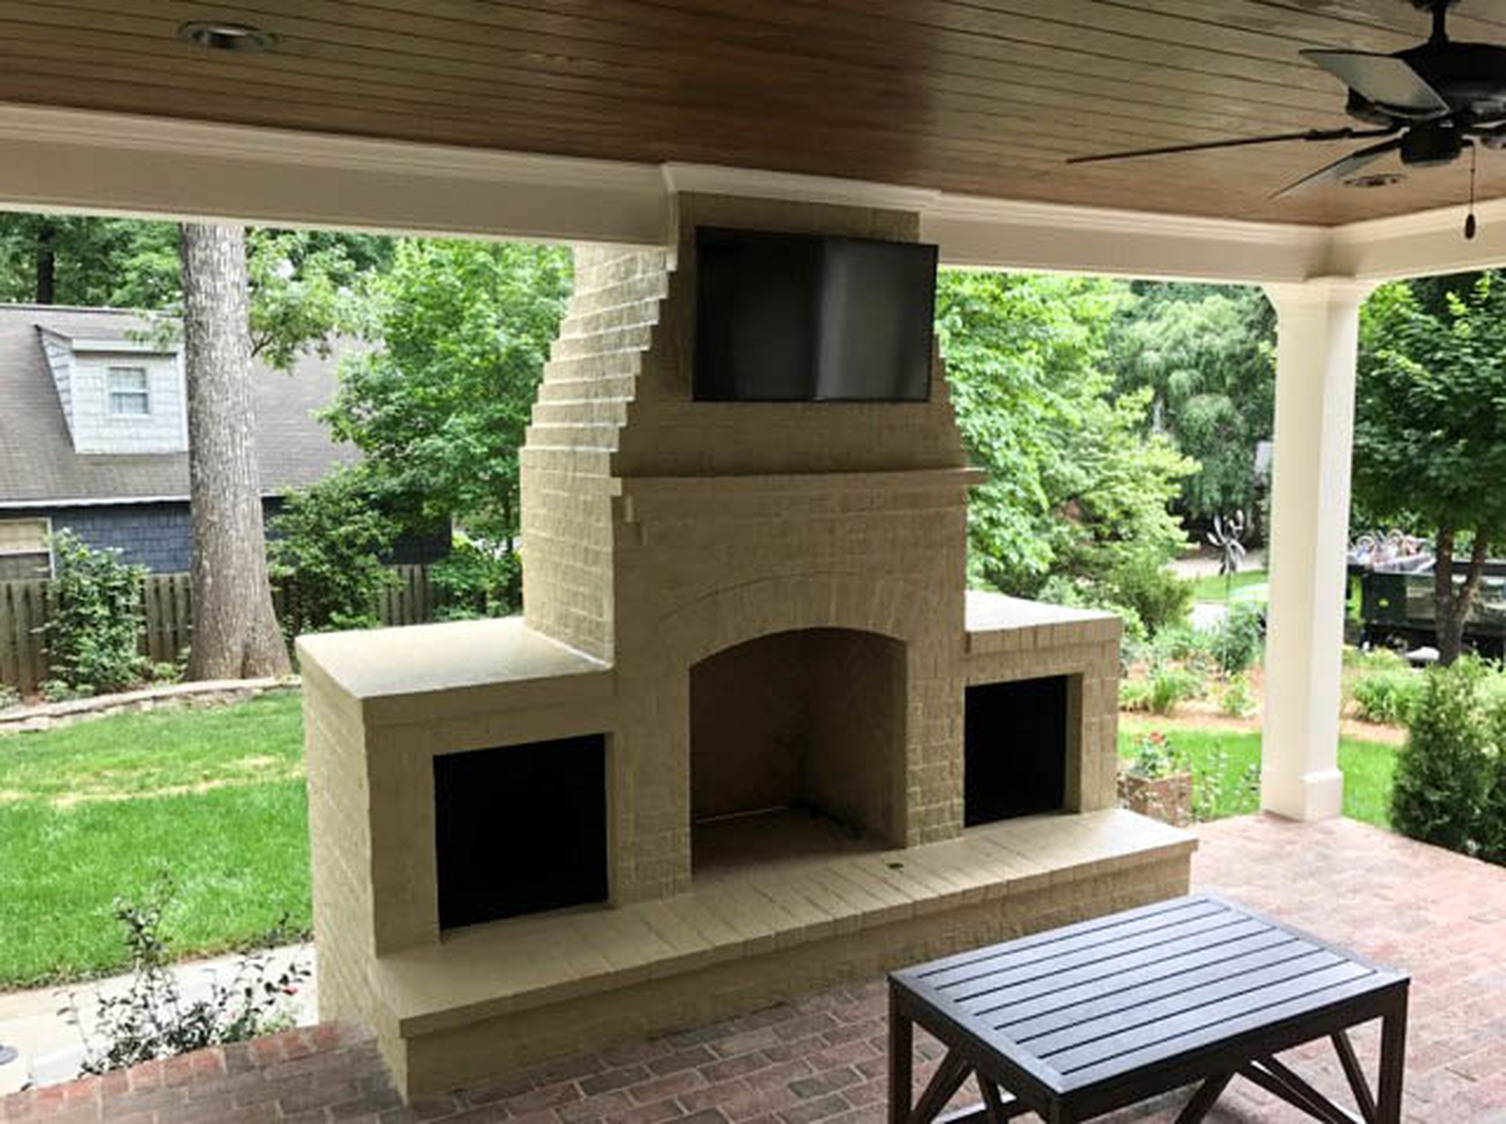 Outdoor Living pizza oven design and building